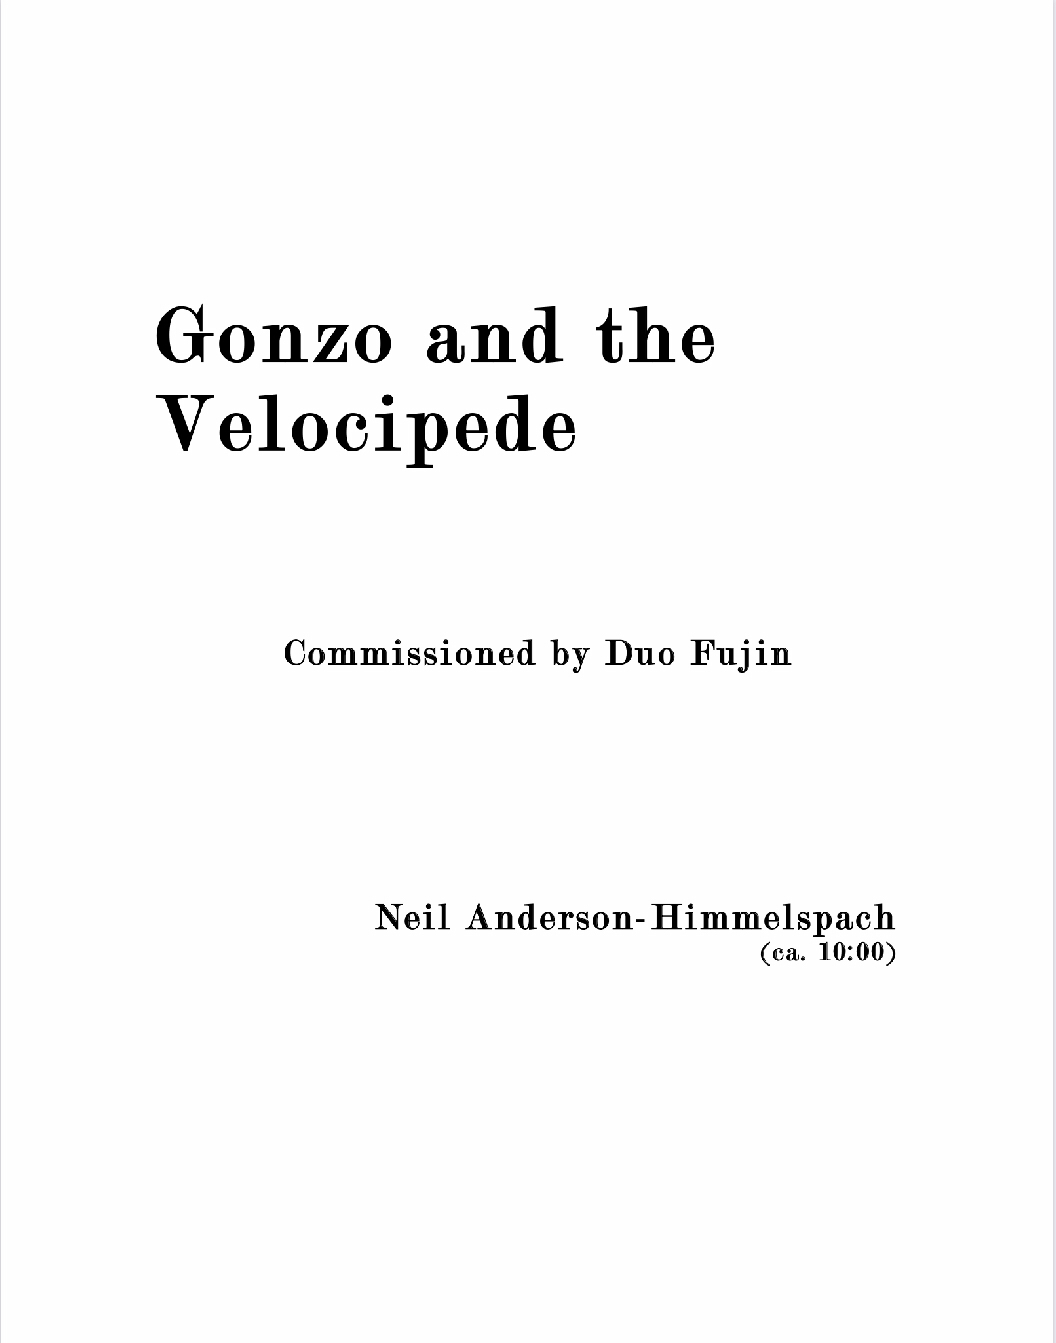 Gonzo And The Velocipede by Neil Anderson-Himmelspach